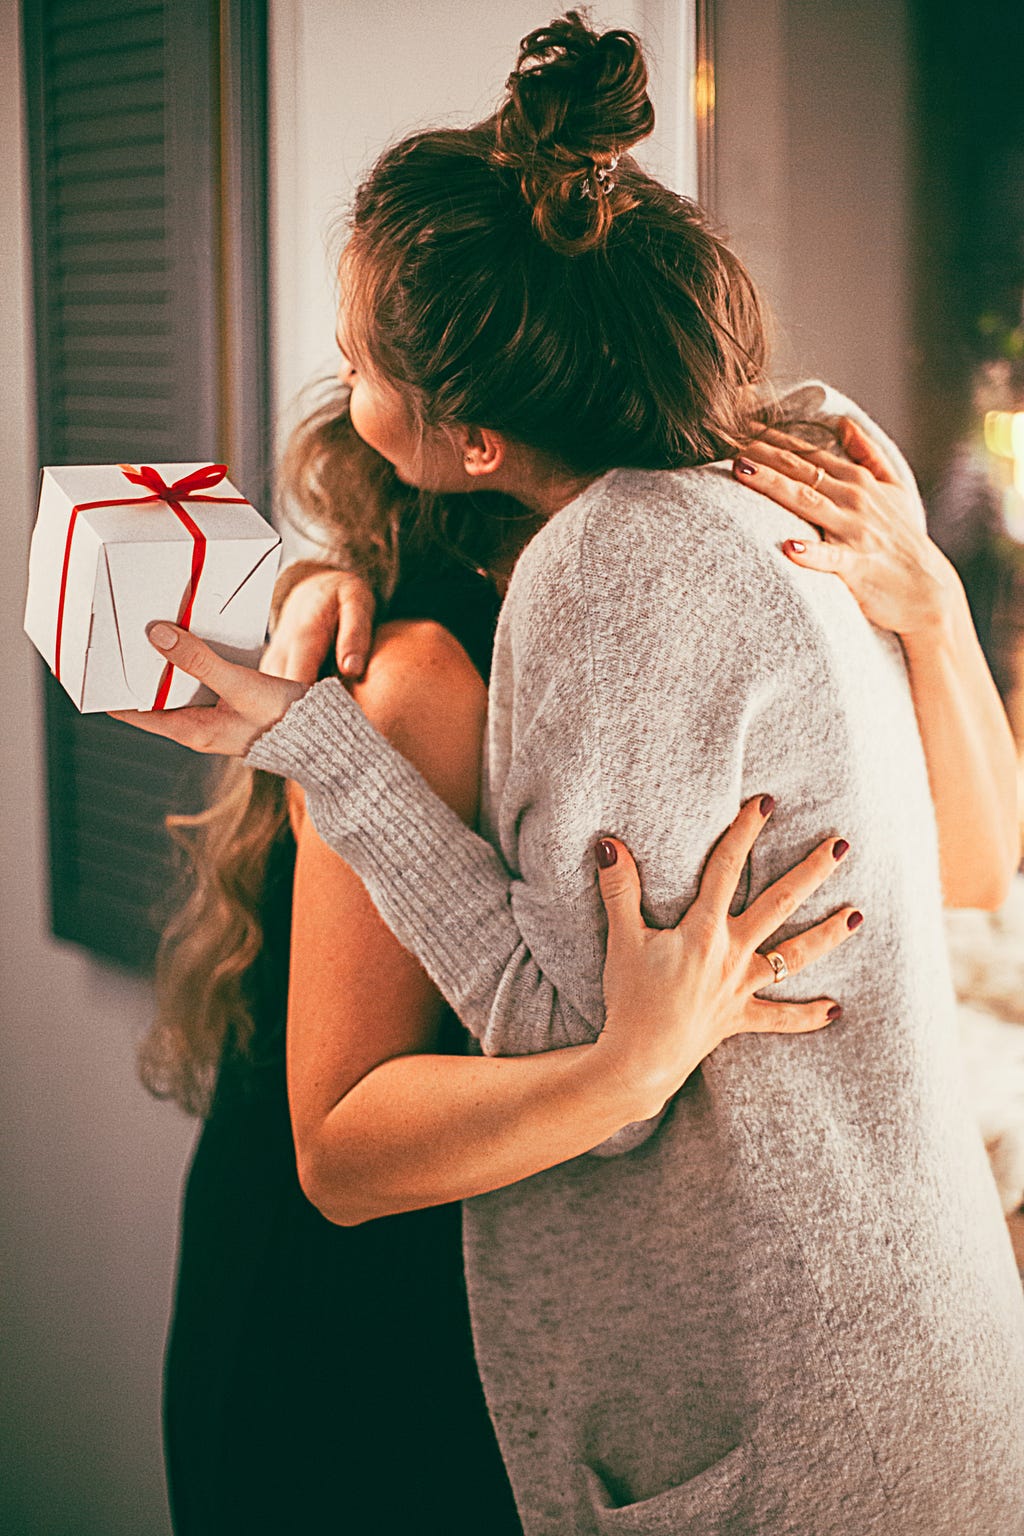 Two women hugging. One woman is holding a small white gift box wrapped in a red ribbon.